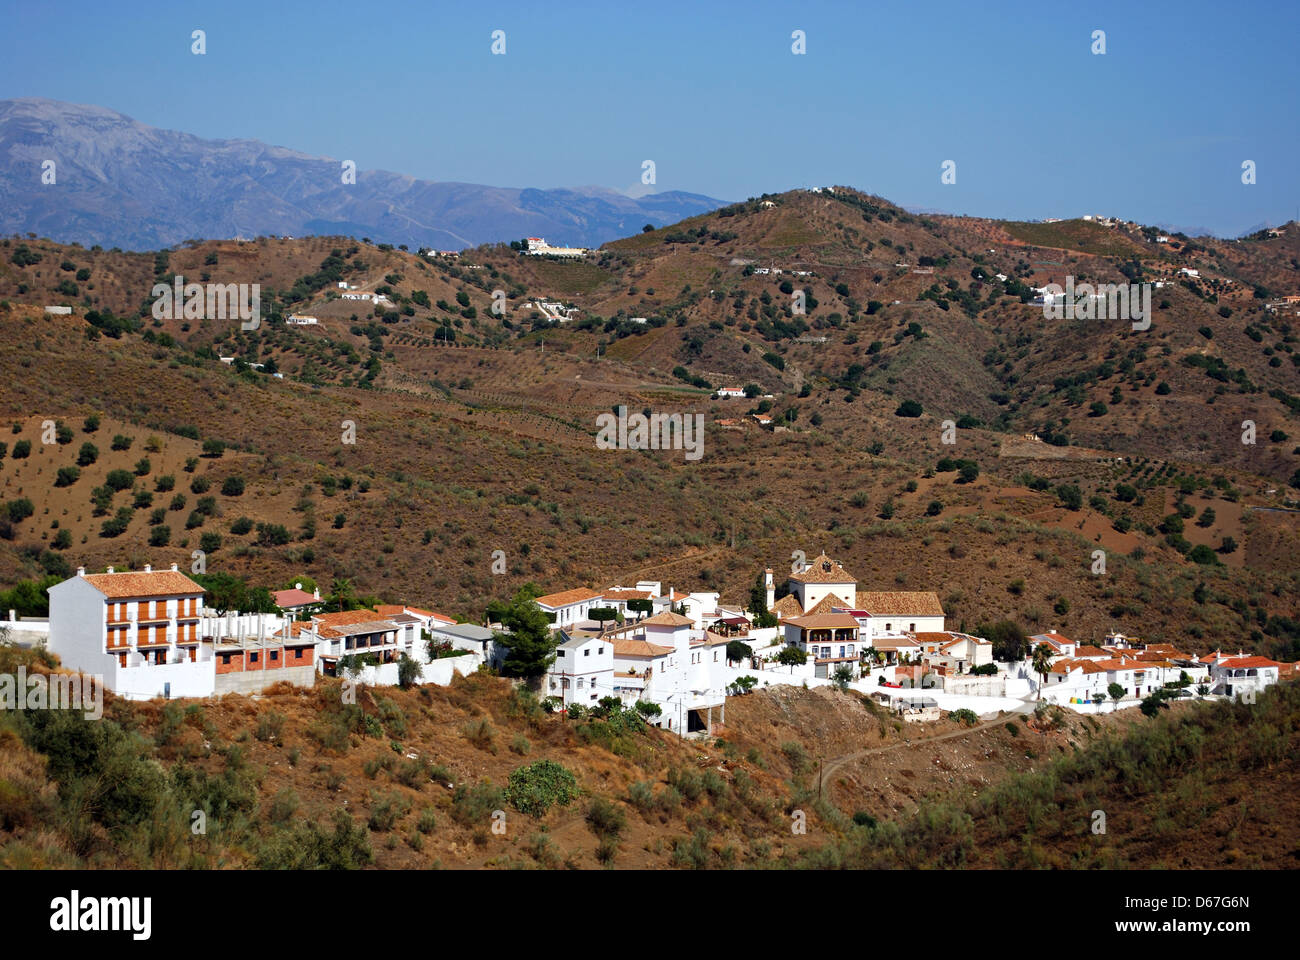 View of white village and surrounding countryside, Macharaviaya, Malaga Province, Andalucia, Spain, Western Europe. Stock Photo